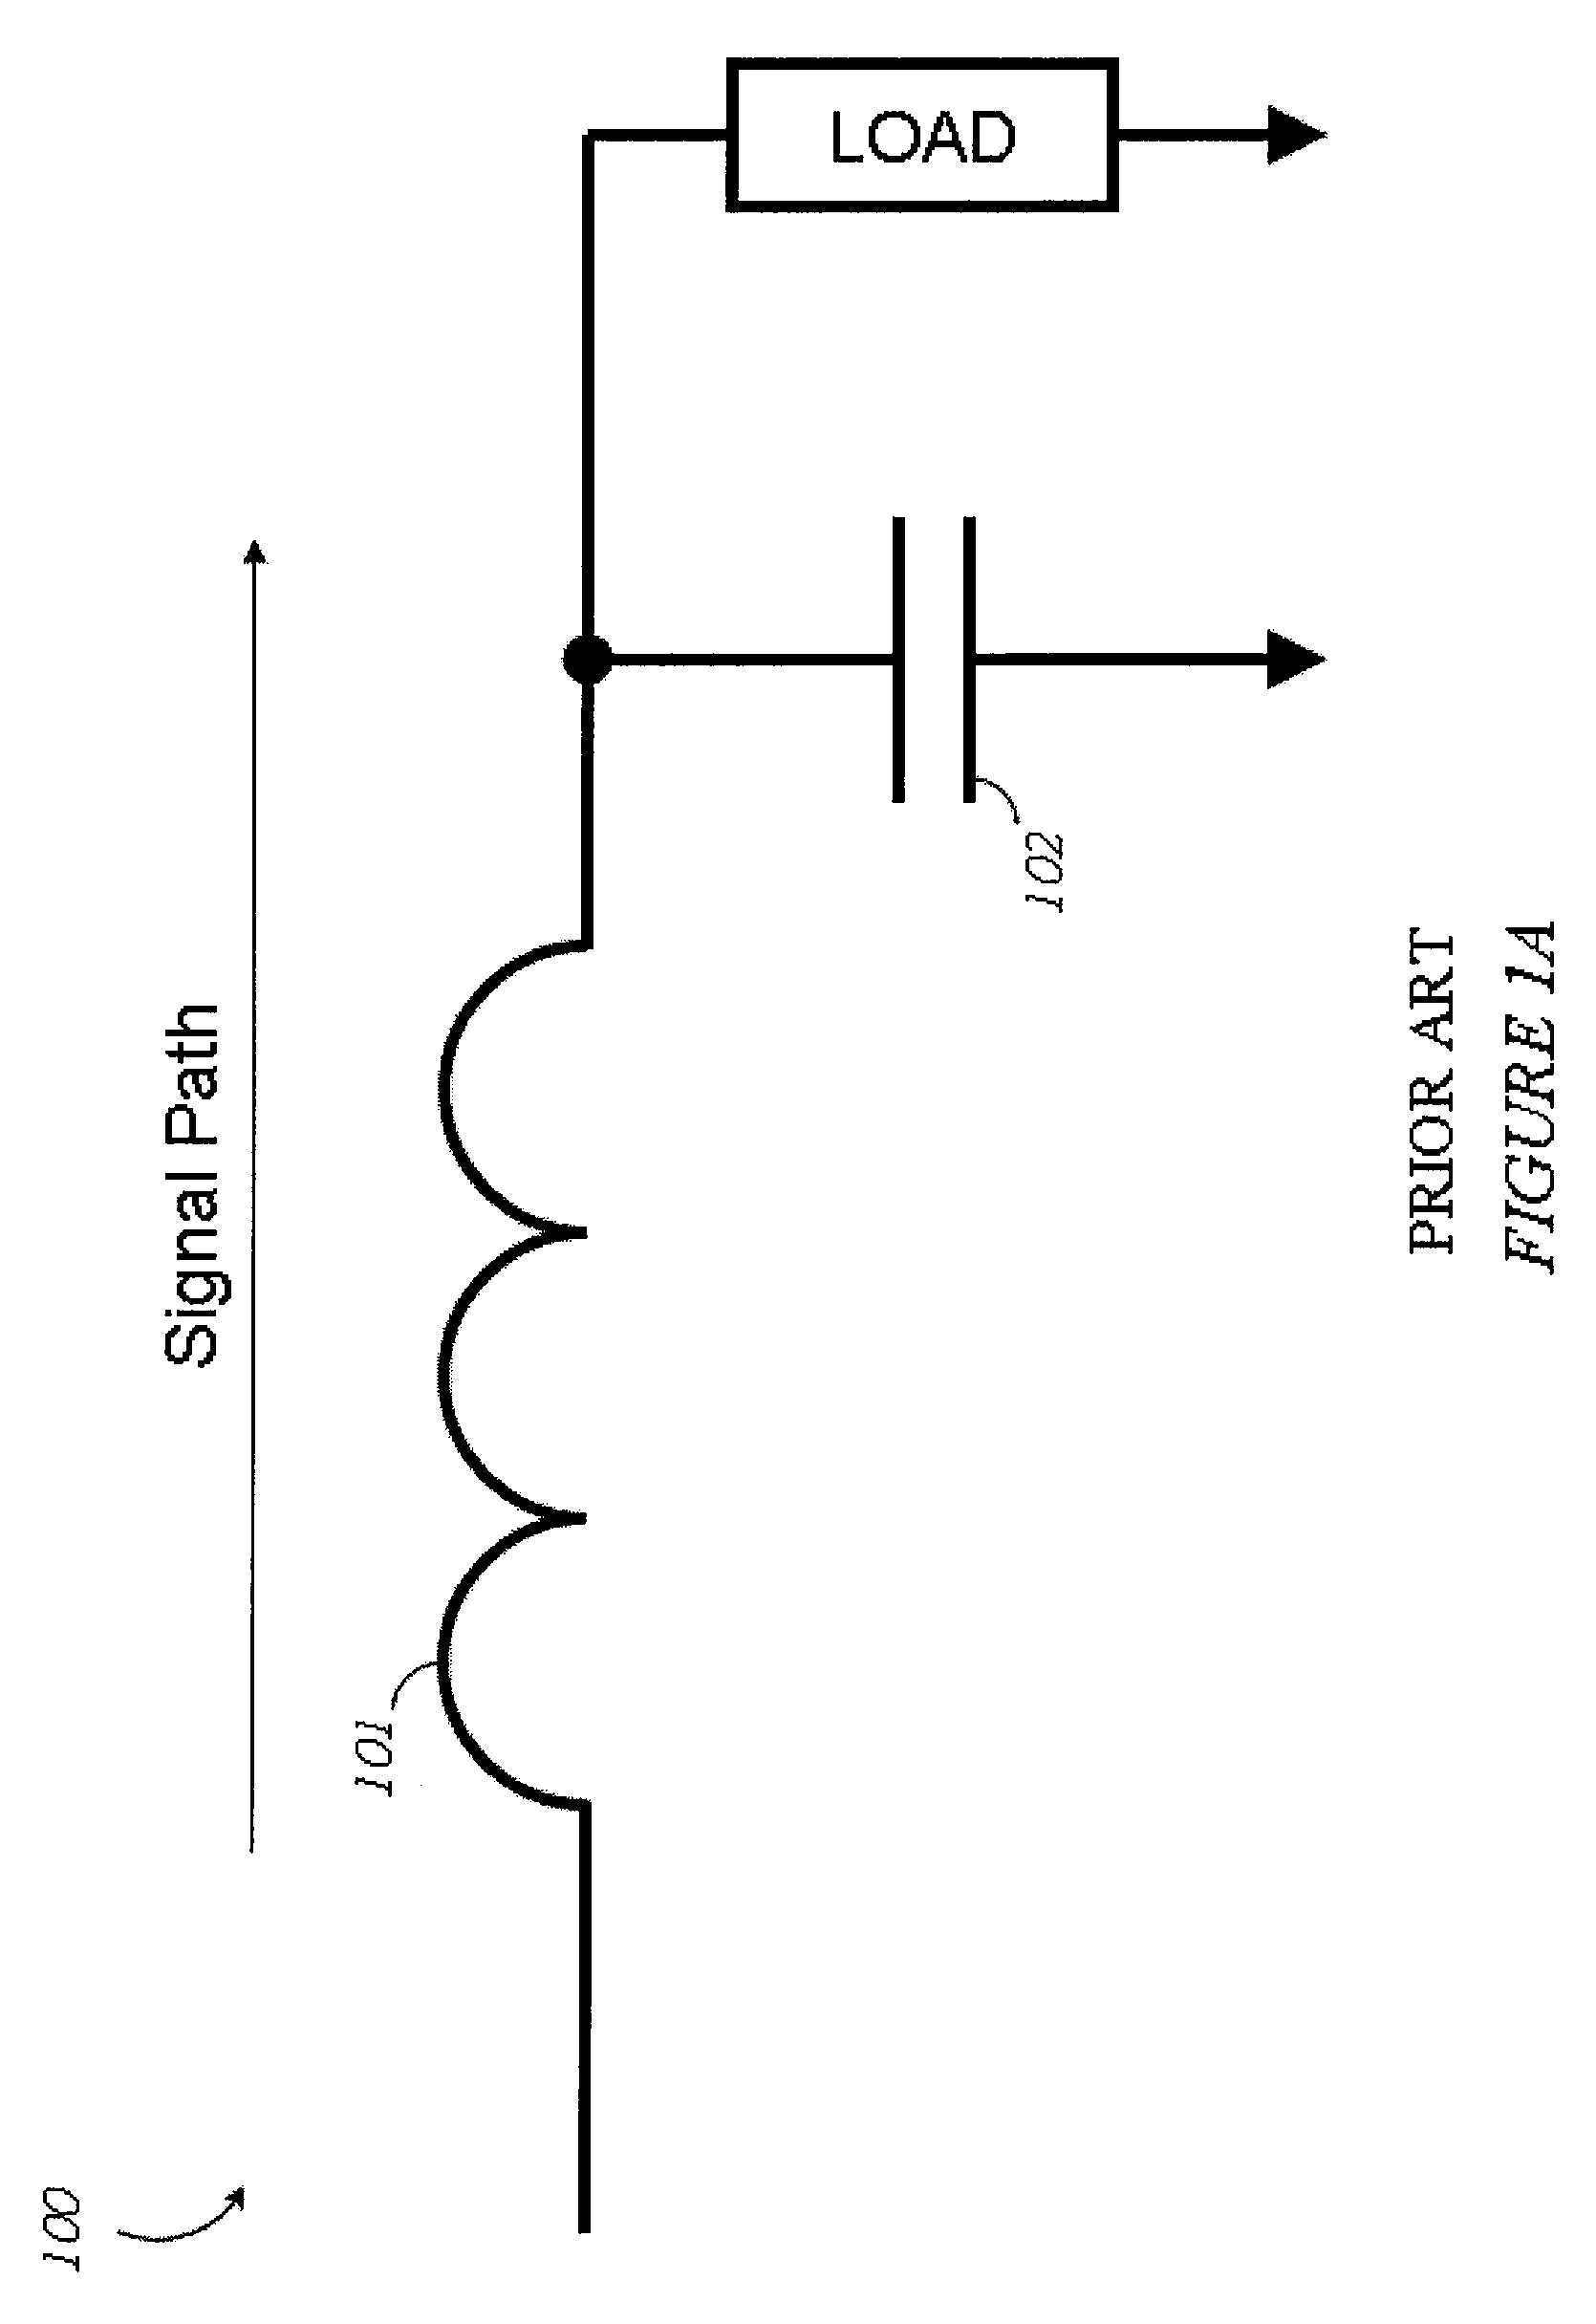 Systems, methods, and apparatus for electrical filters and input/output systems